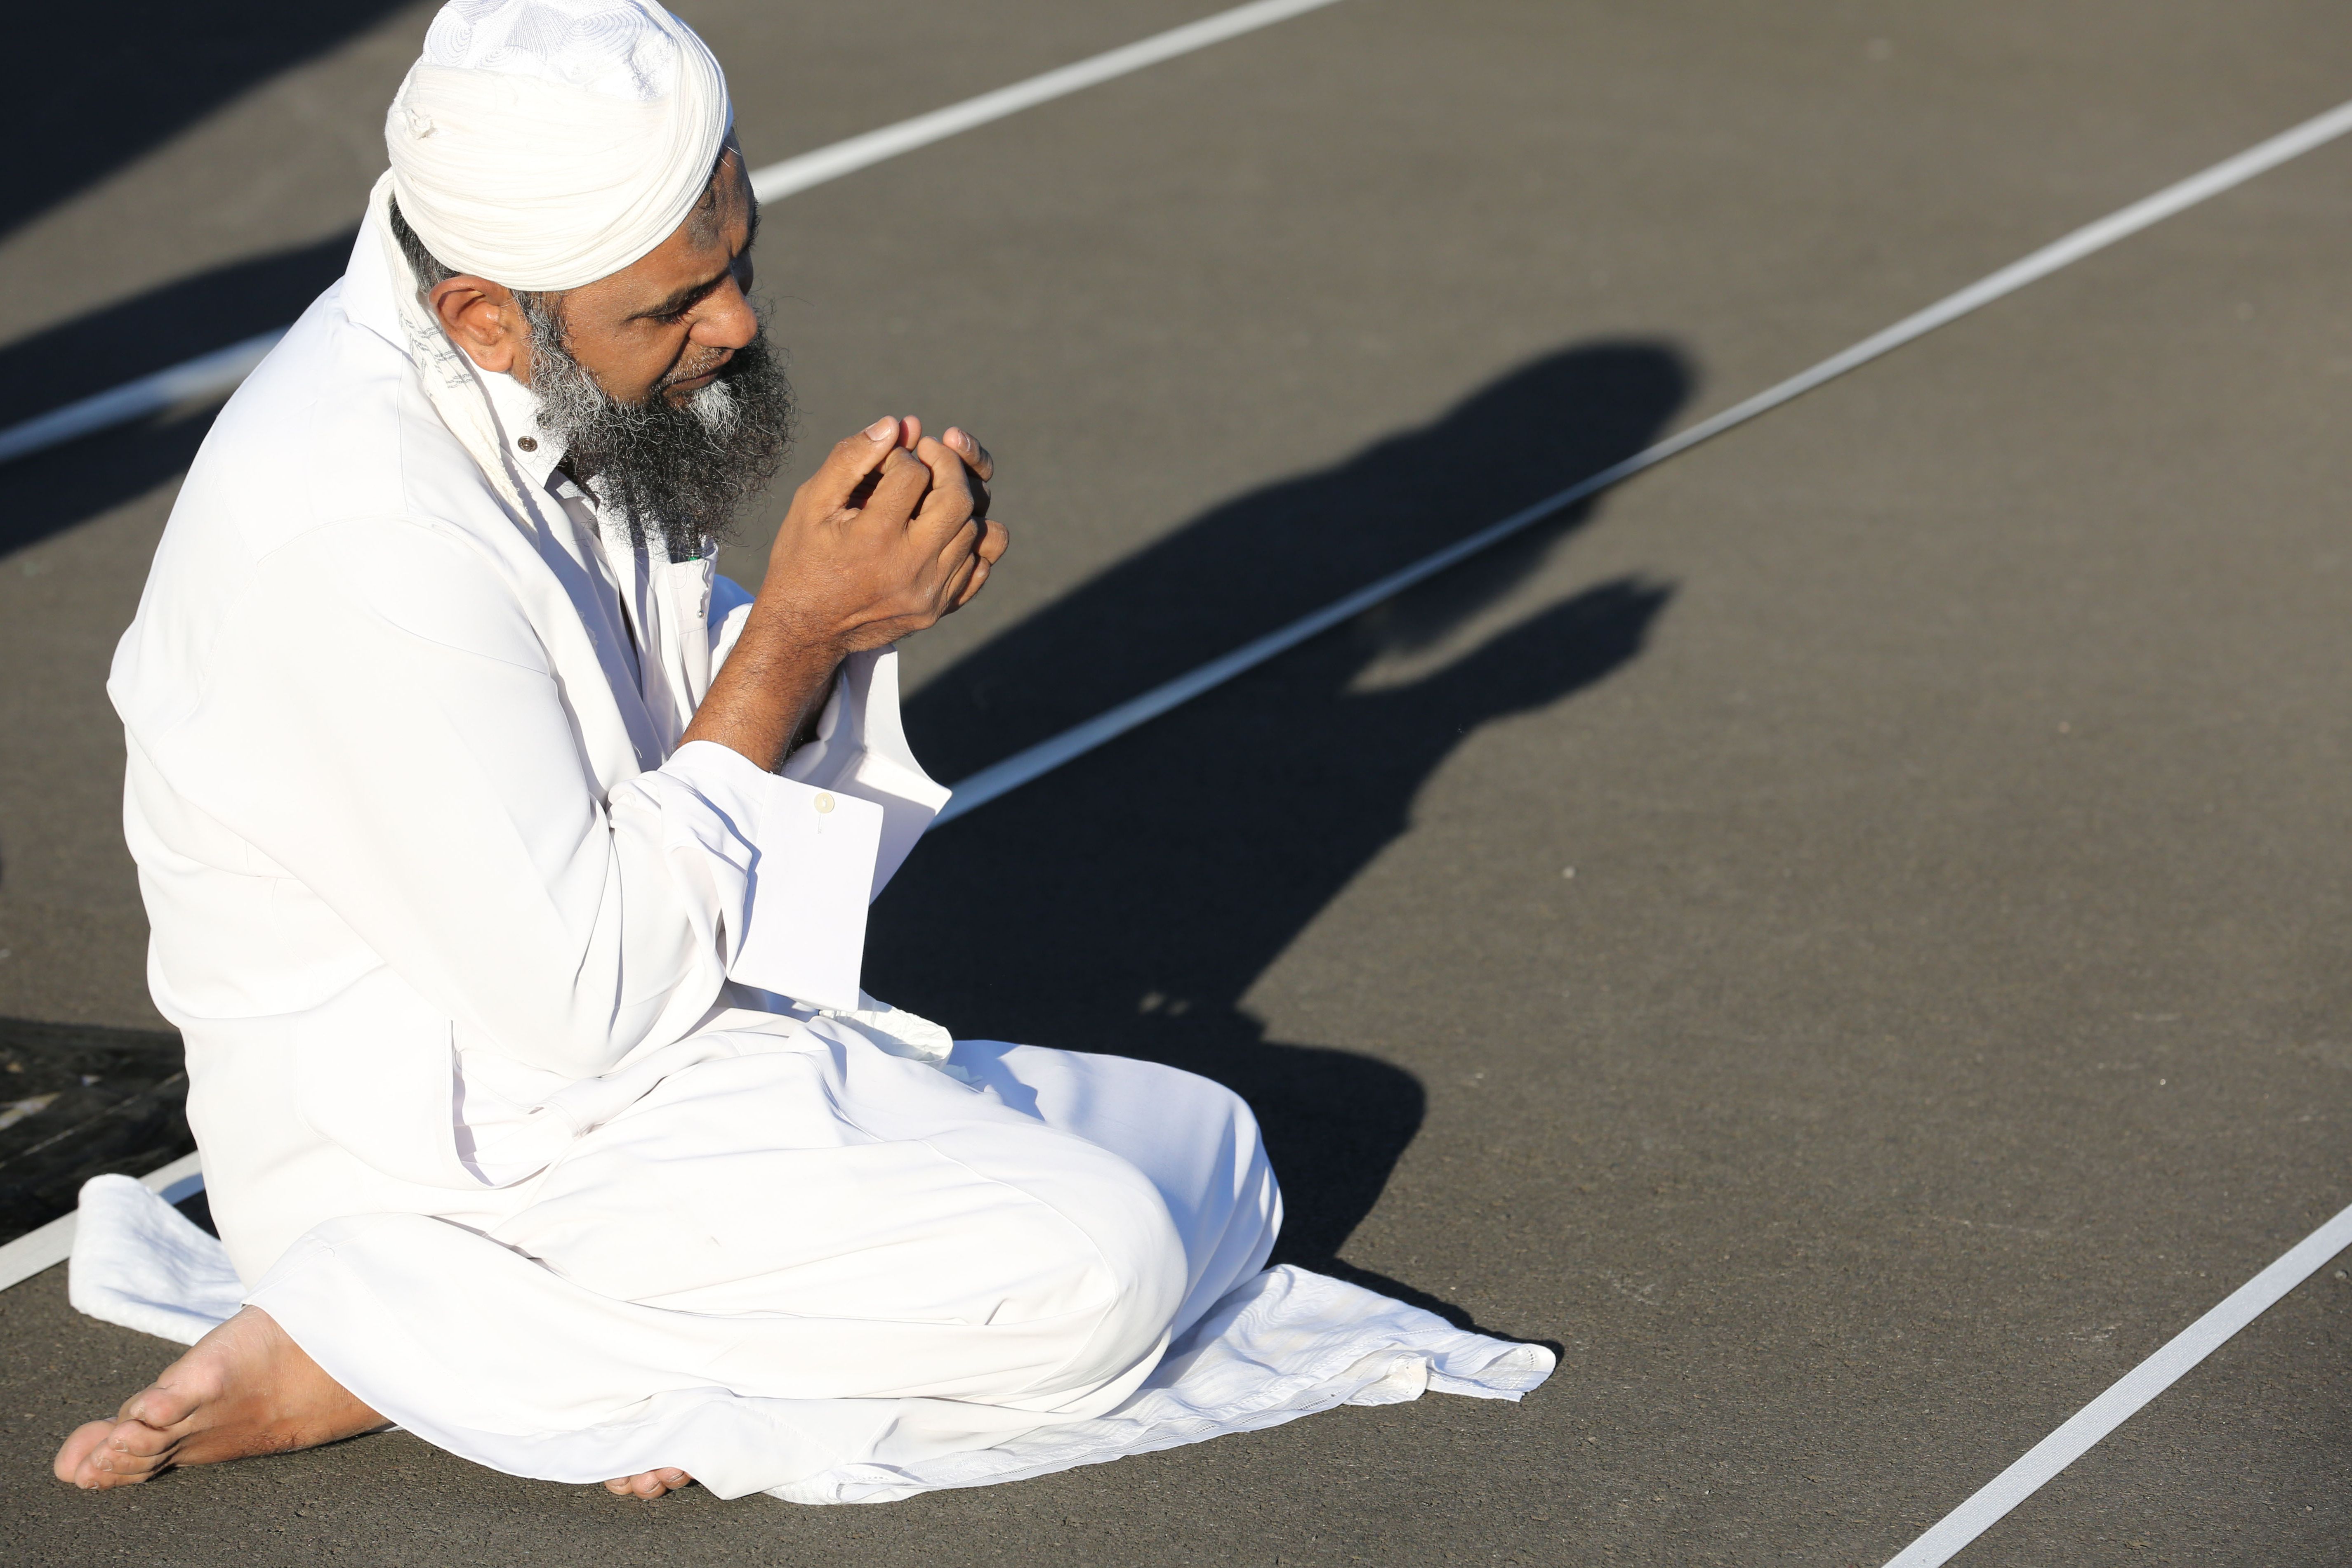 2016-07-06 00:04:32 A man prays during a large communal prayer at the velodrome of Saint-Denis de la Reunion on the French island of Reunion in the Indian Ocean on July 6, 2016, as Muslims celebrate Eid al-Fitr, which marks the end of the fasting month of Ramadan. / AFP PHOTO / RICHARD BOUHET